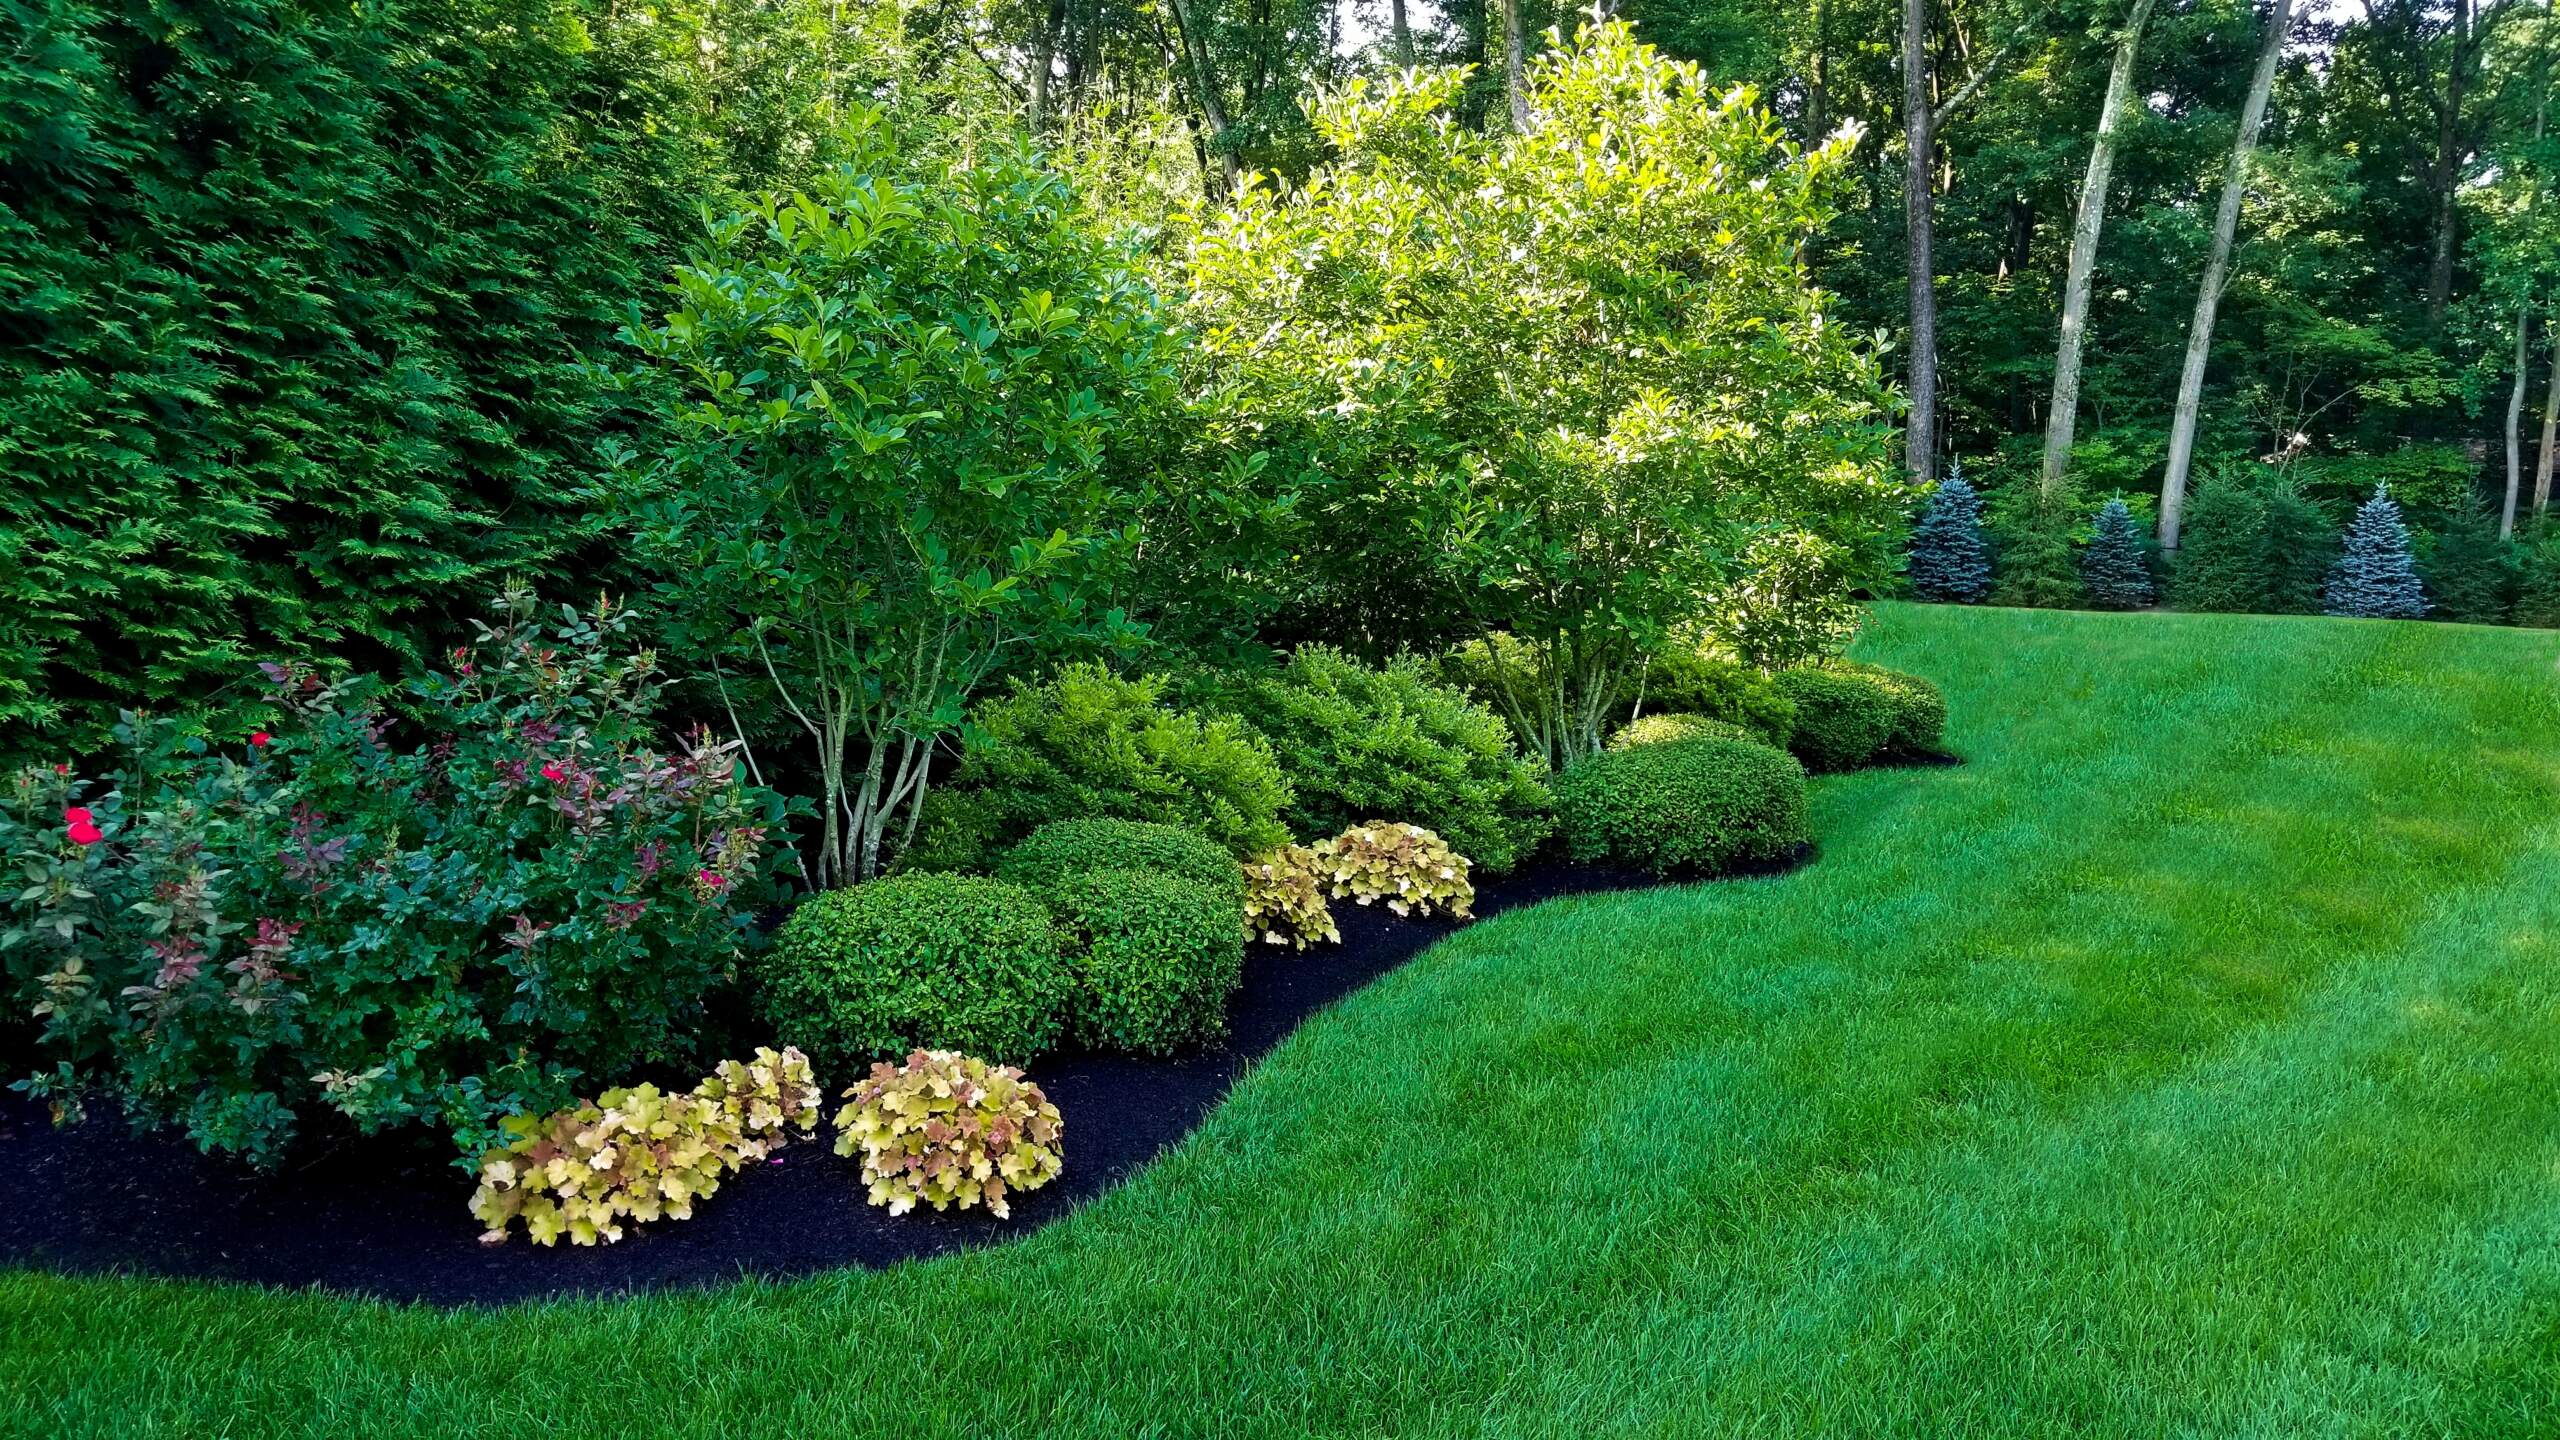 comprehensive lawn care service analyzes and evaluates the health and condition of all outdoor plant life on your property